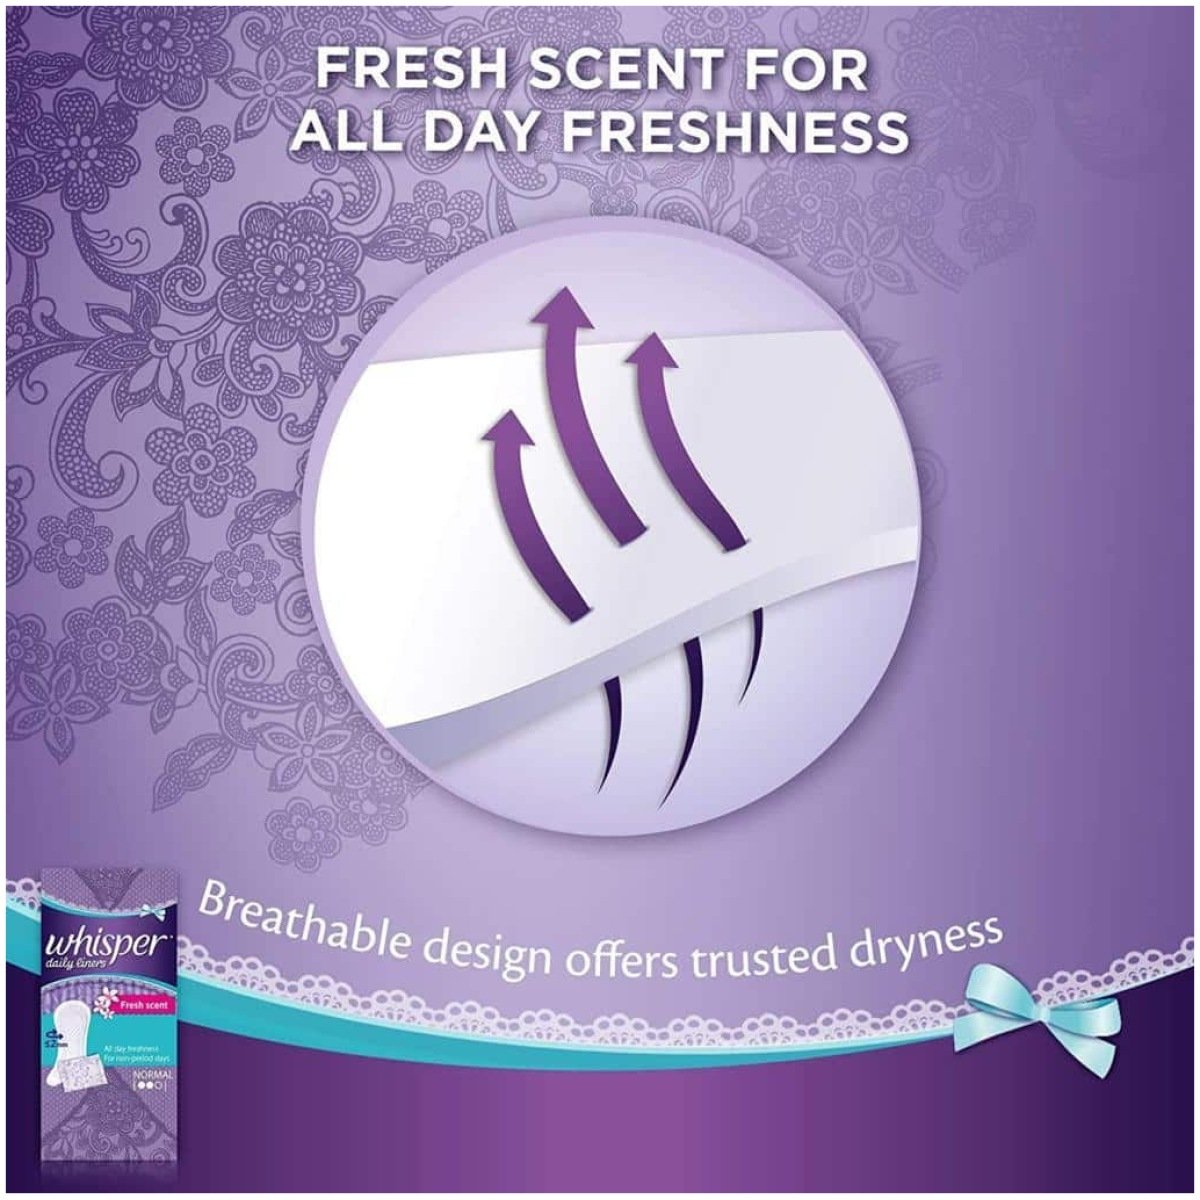 Whisper Clean And Fresh Daily Liners 20 Sanitary Pads For Women